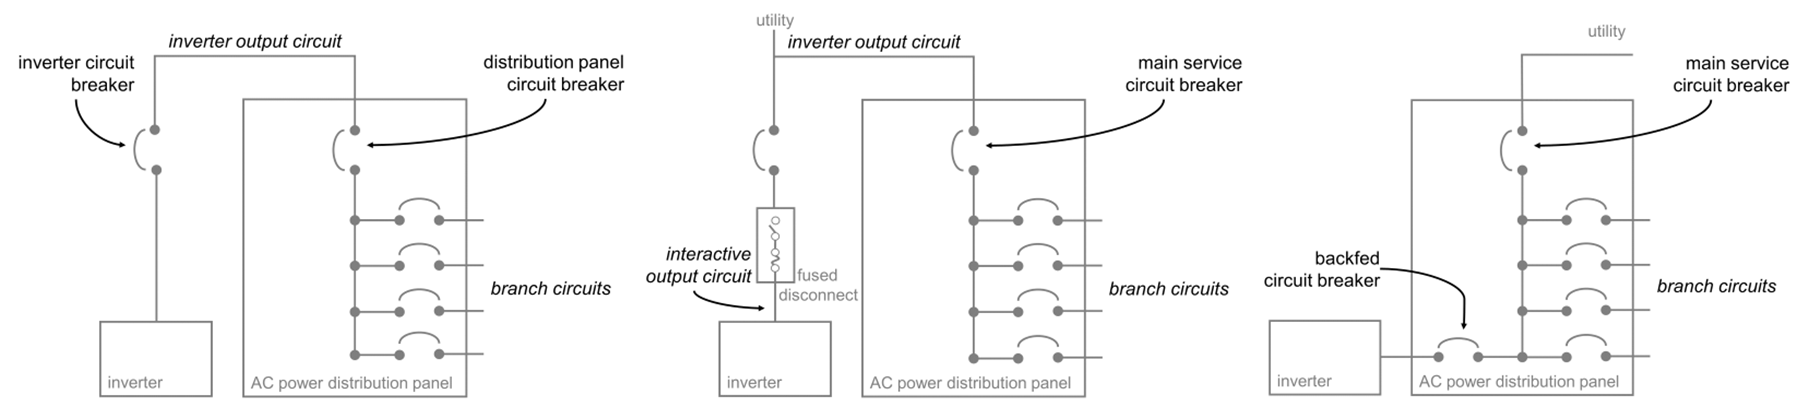 Inverter output overcurrent protection and disconnects for different system types, including stand-alone systems (left), supply-side connection (center) and load-side connection (right).